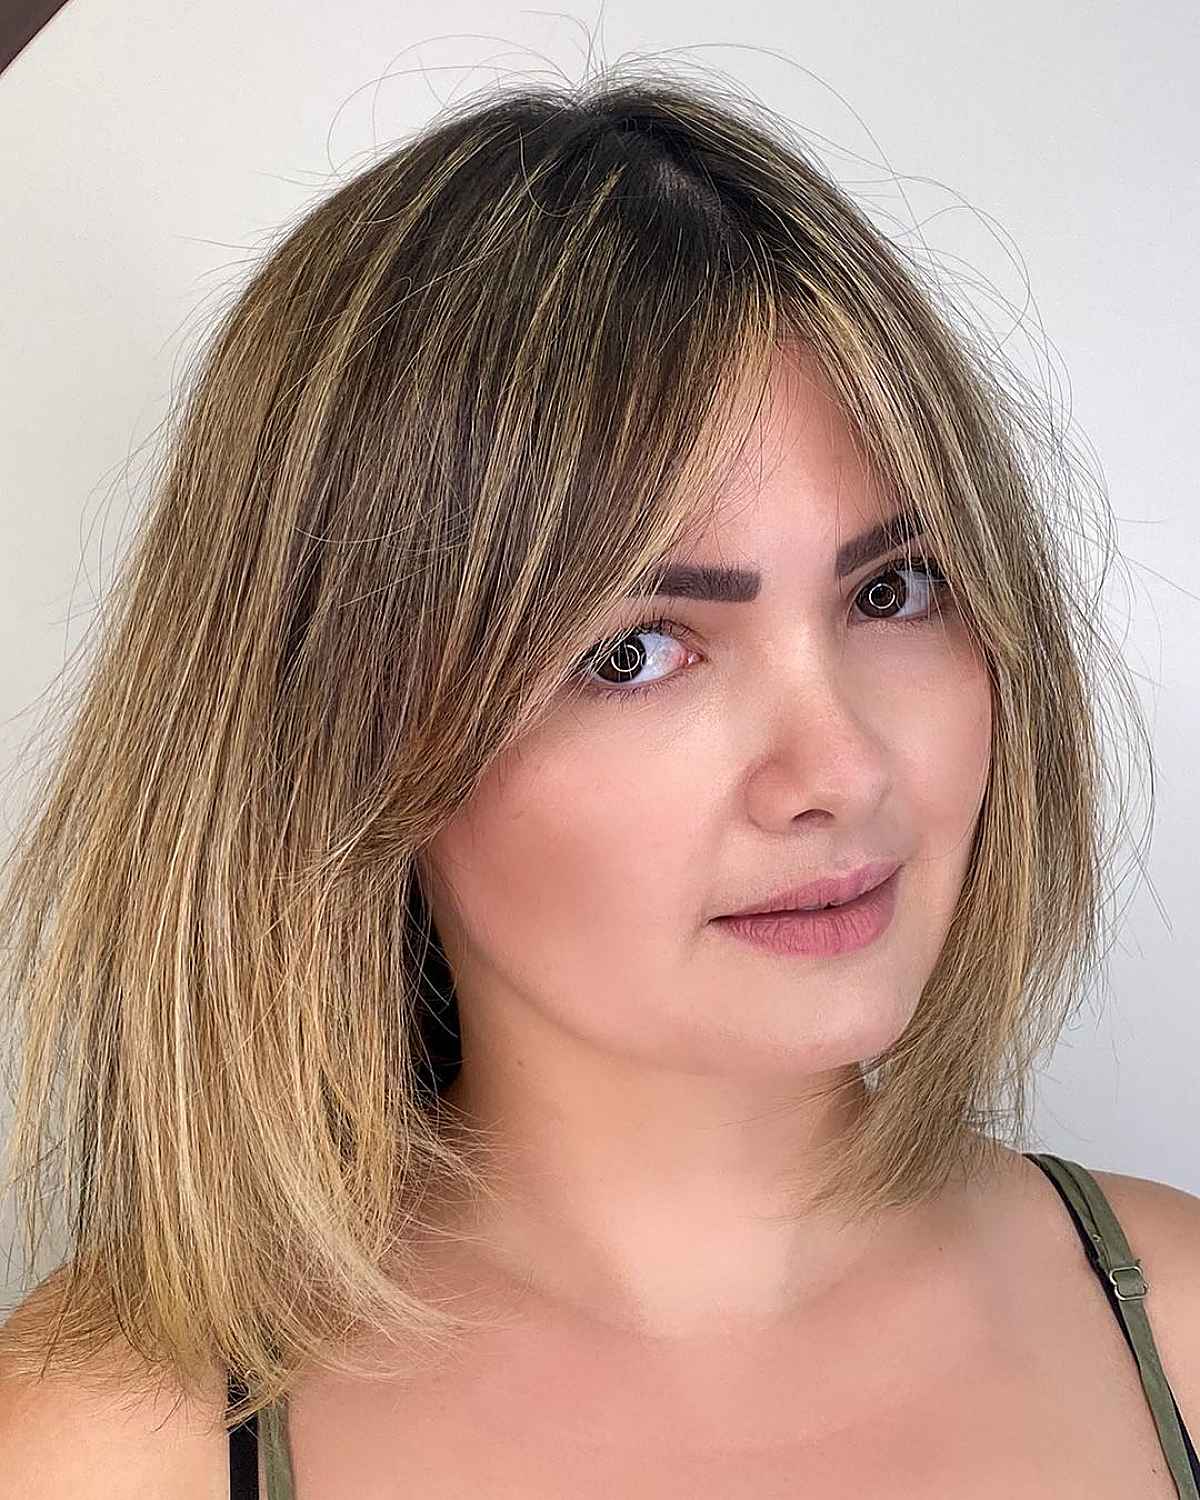 15 Flattering Long Bob Haircuts for Women with Full and Round Faces